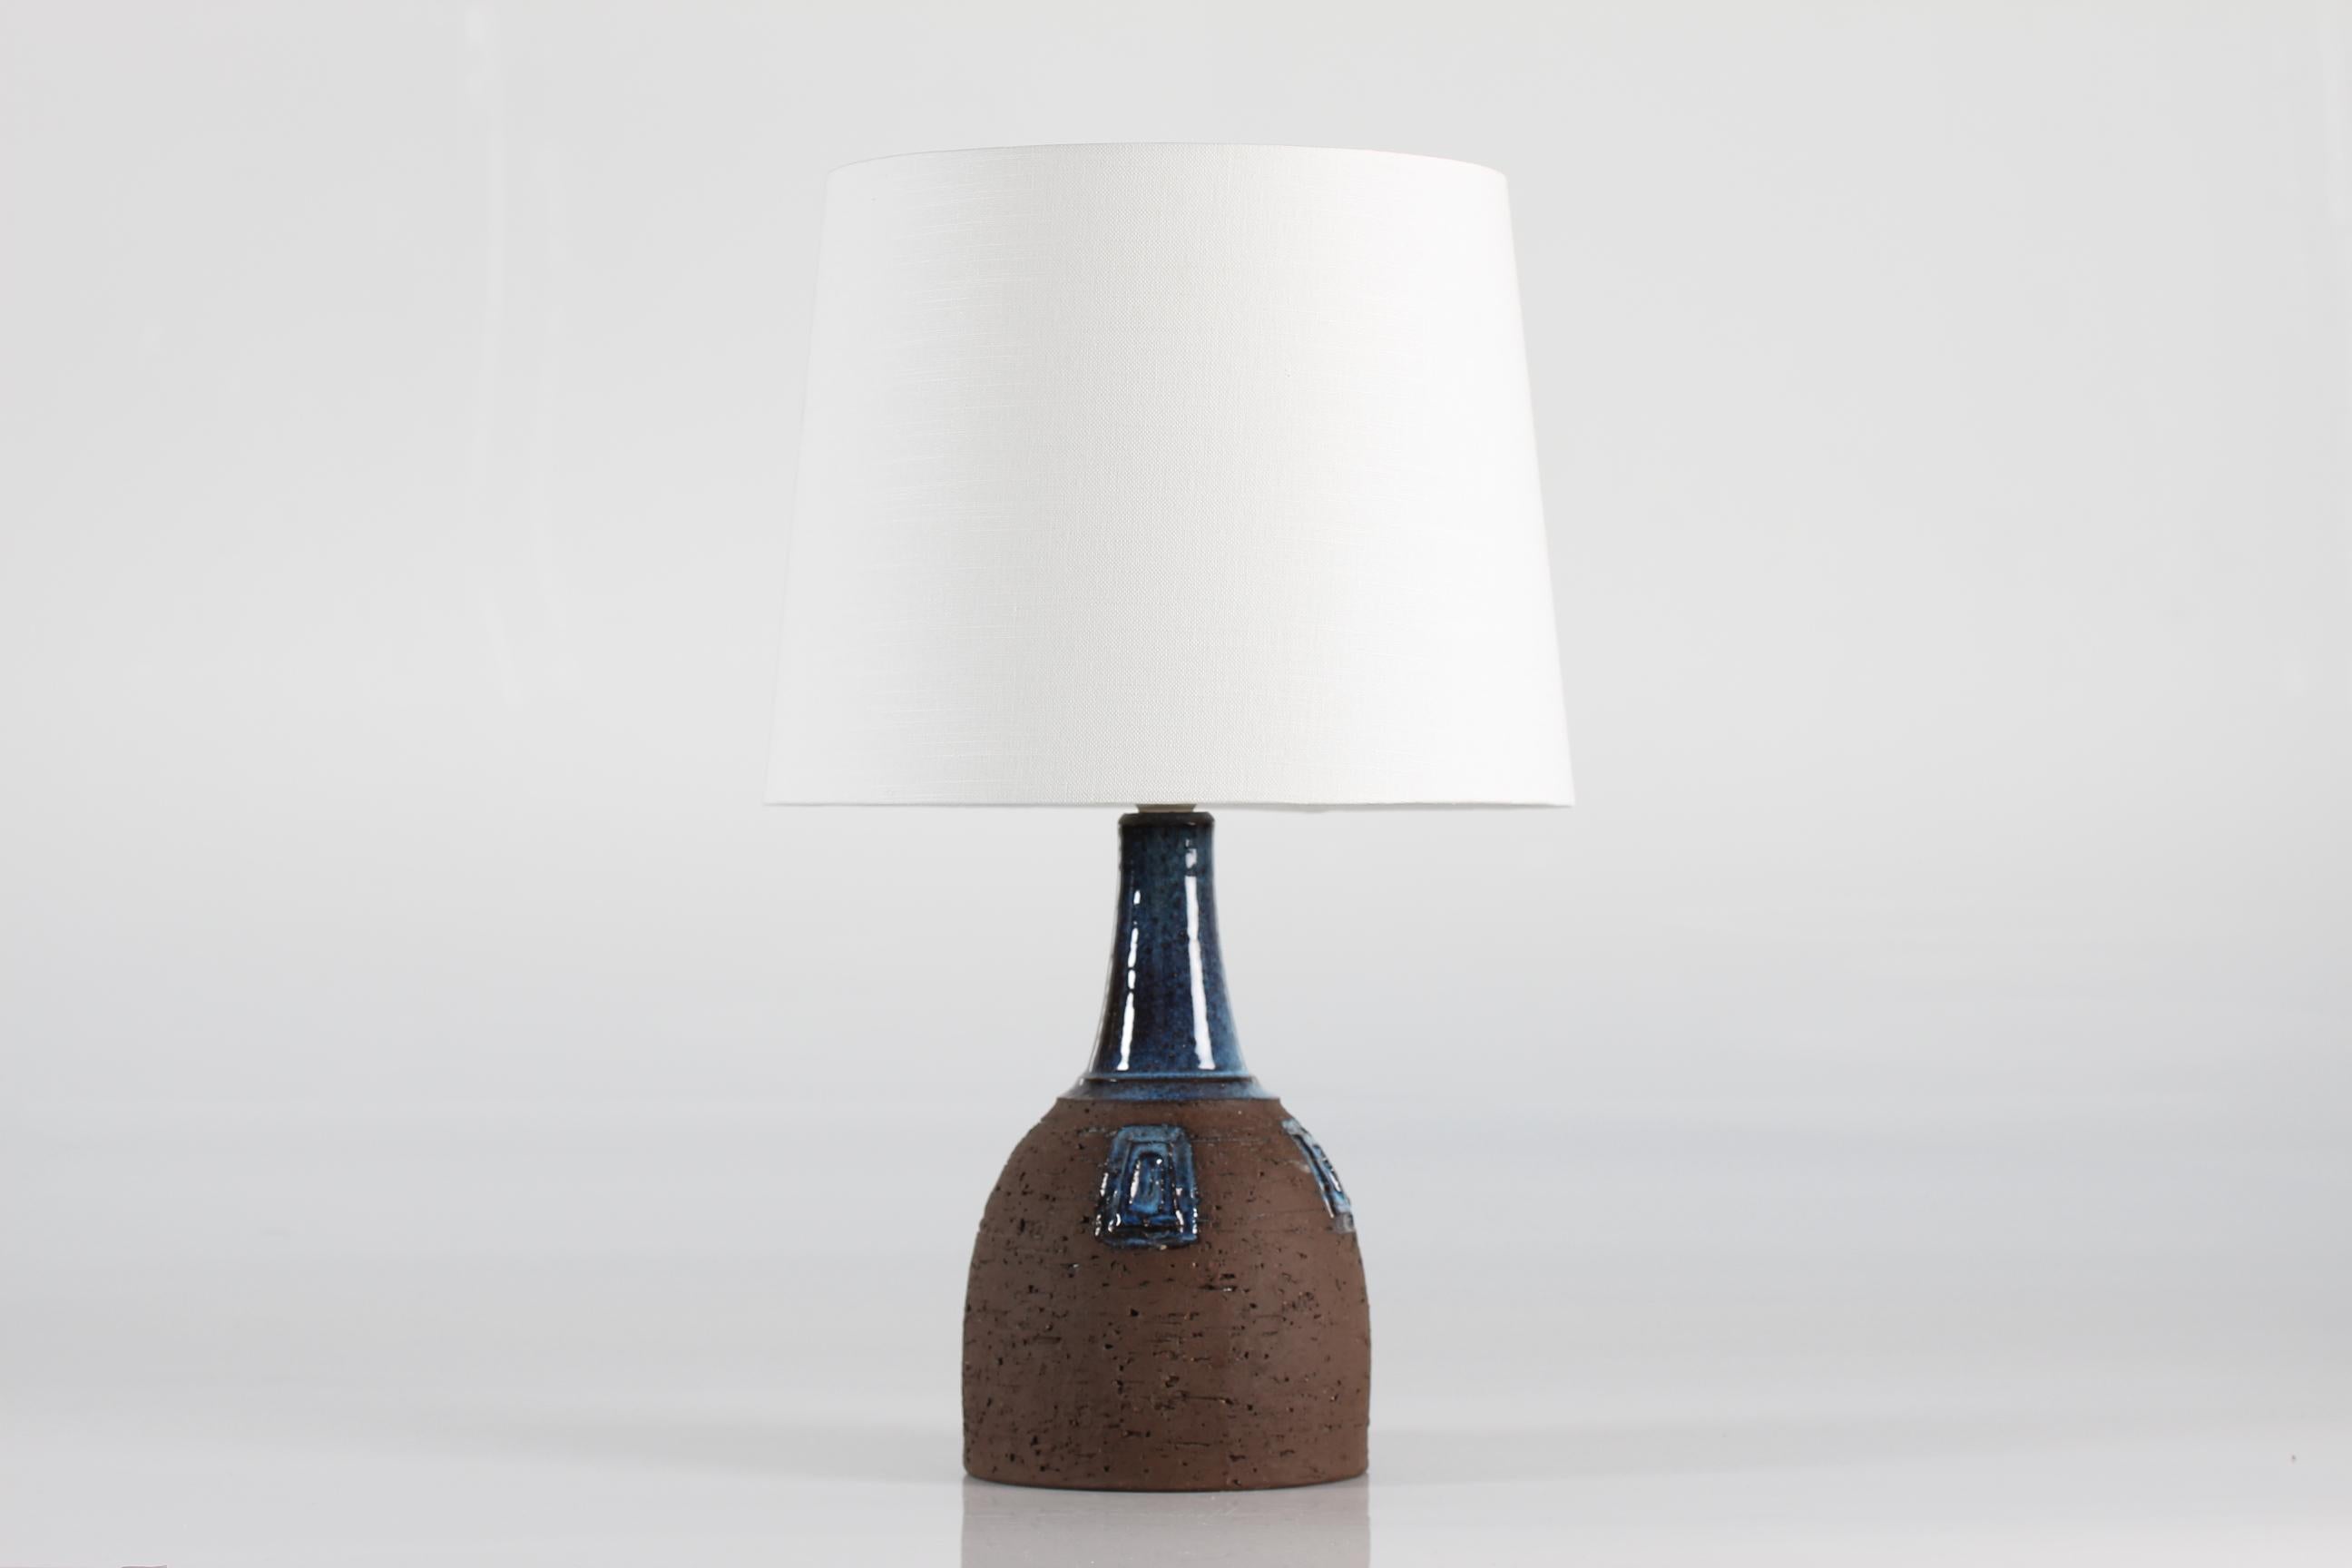 Brutalist mid-century Danish ceramic table lamp by Fridtjof Sejersen for Sejer Unik ceramic workshop, ca 1960s or 70s. 
It´s made in his own studio workshop in Nr. Aaby on the Danish island Funen. 
Fridtjof Sejersen ran his studio from 1941 to